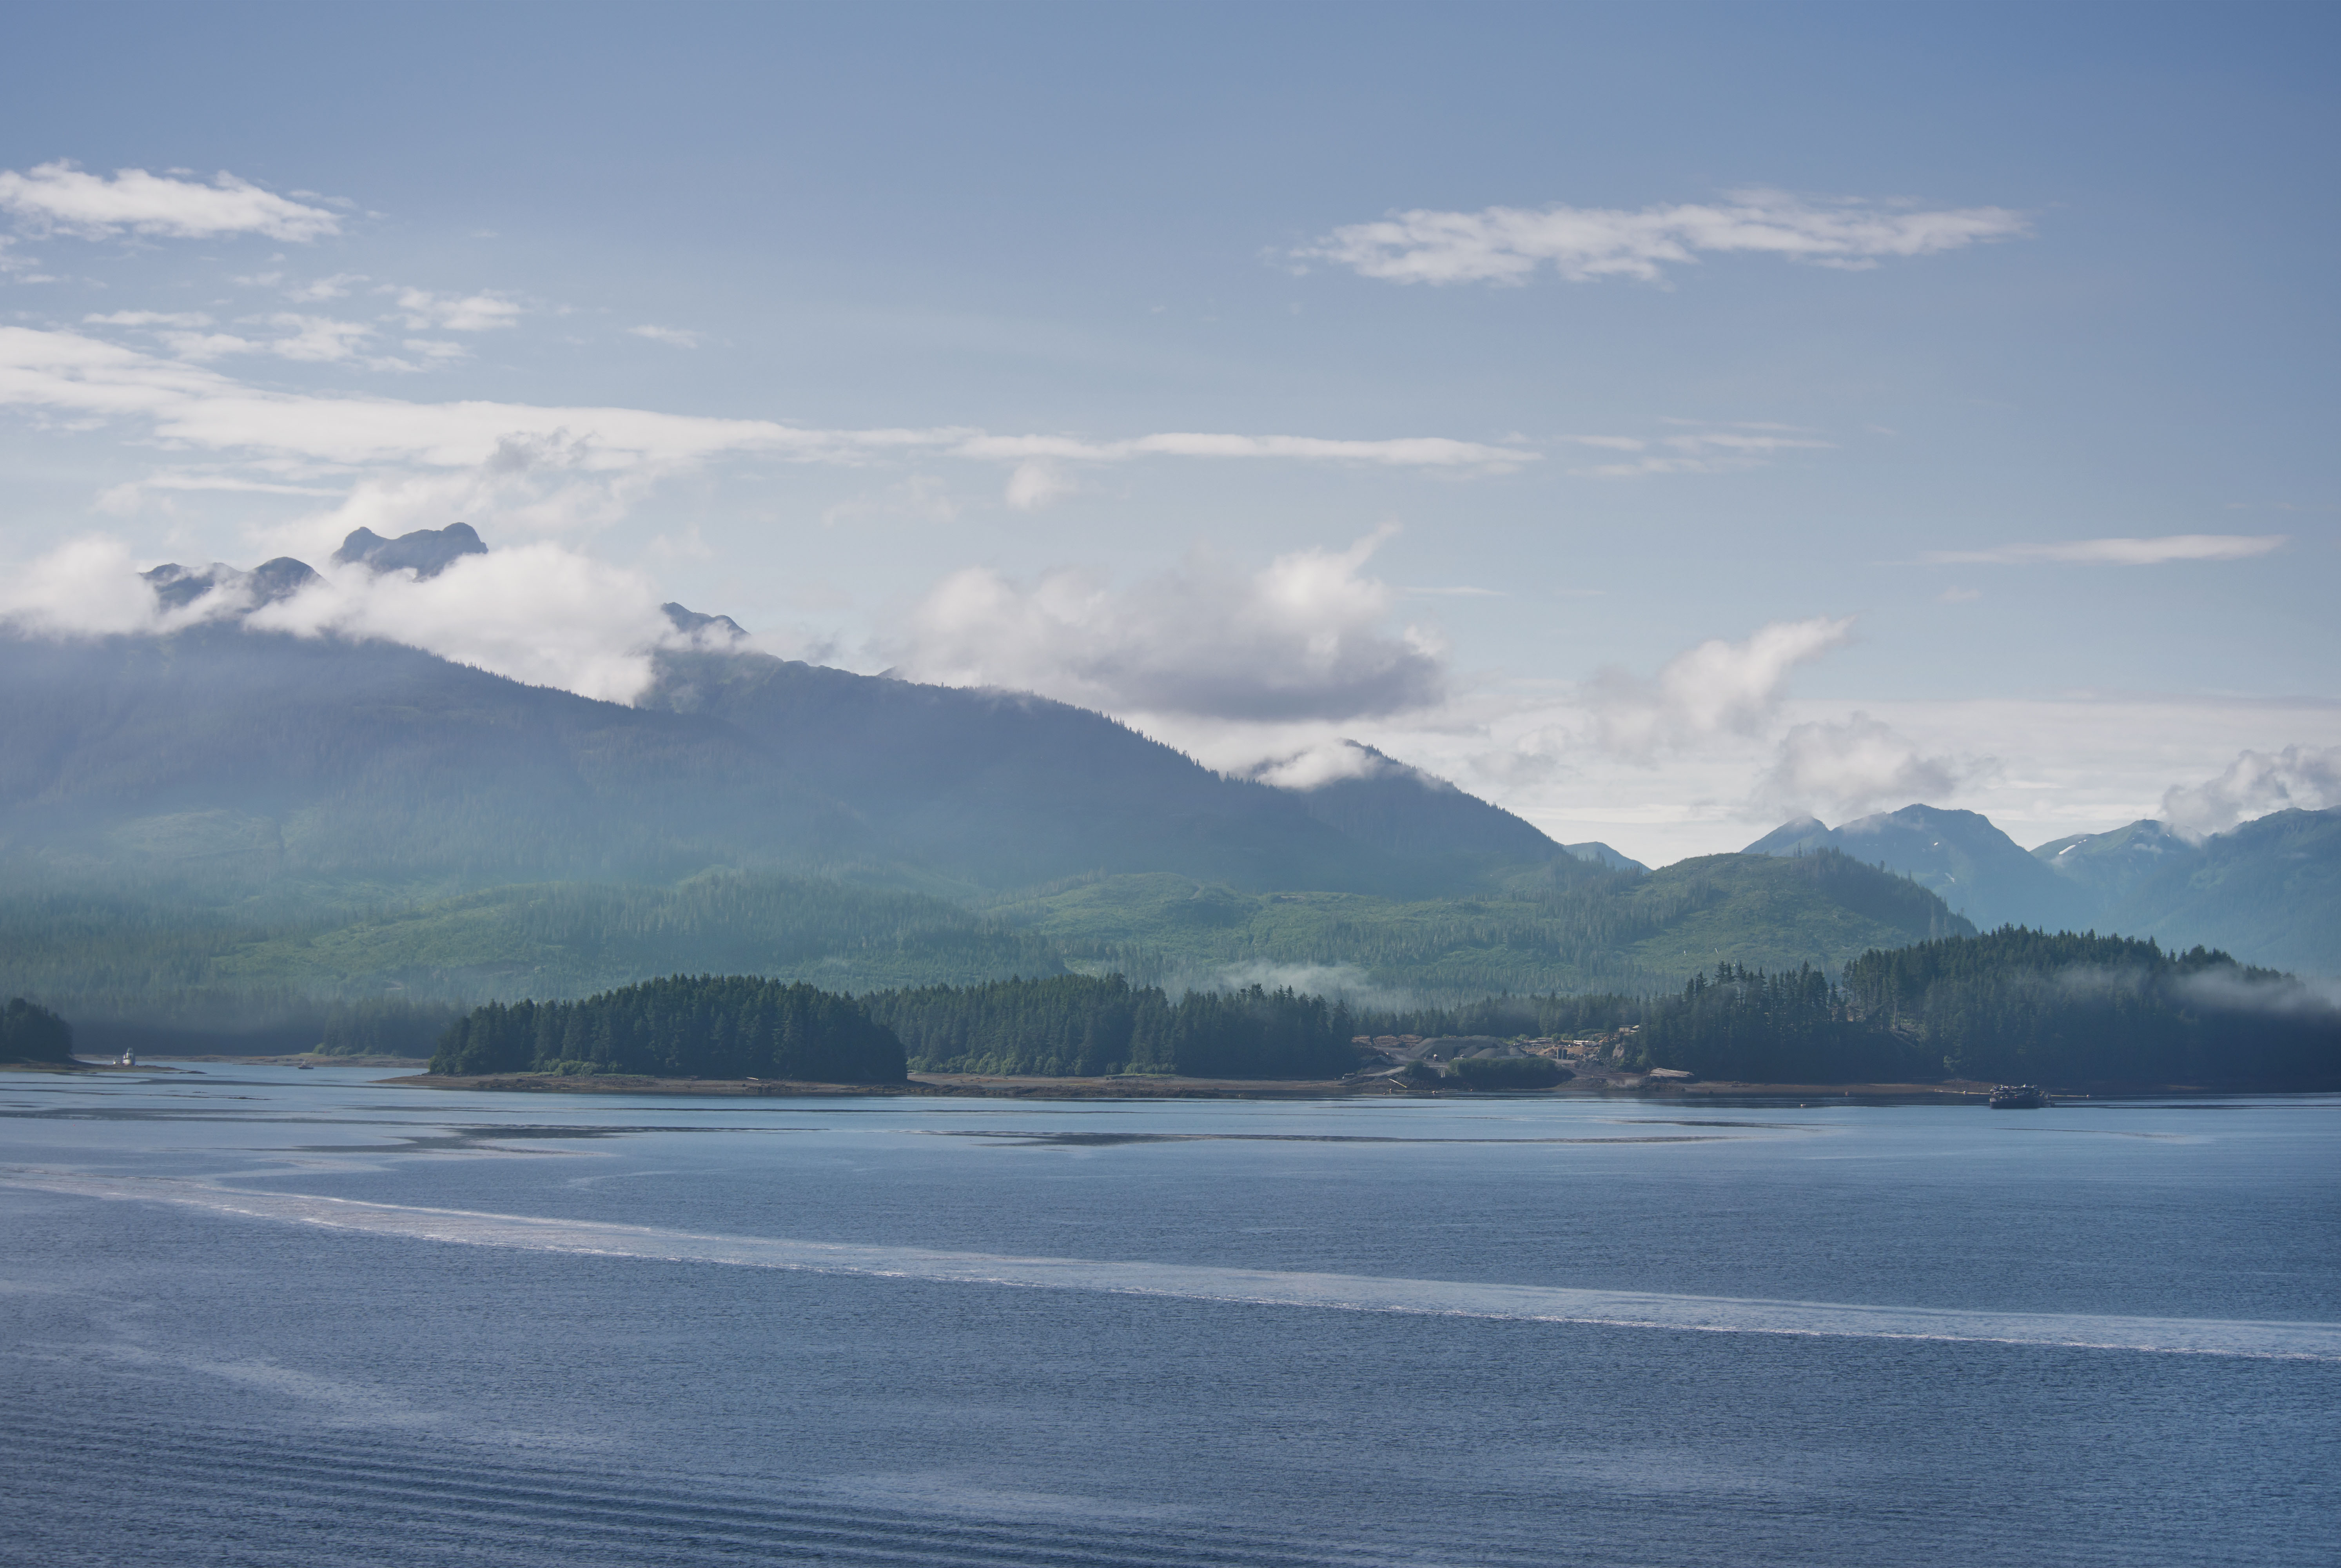 Scenic landscape from Icy Strait Point, Hoonah, Alaska, USA